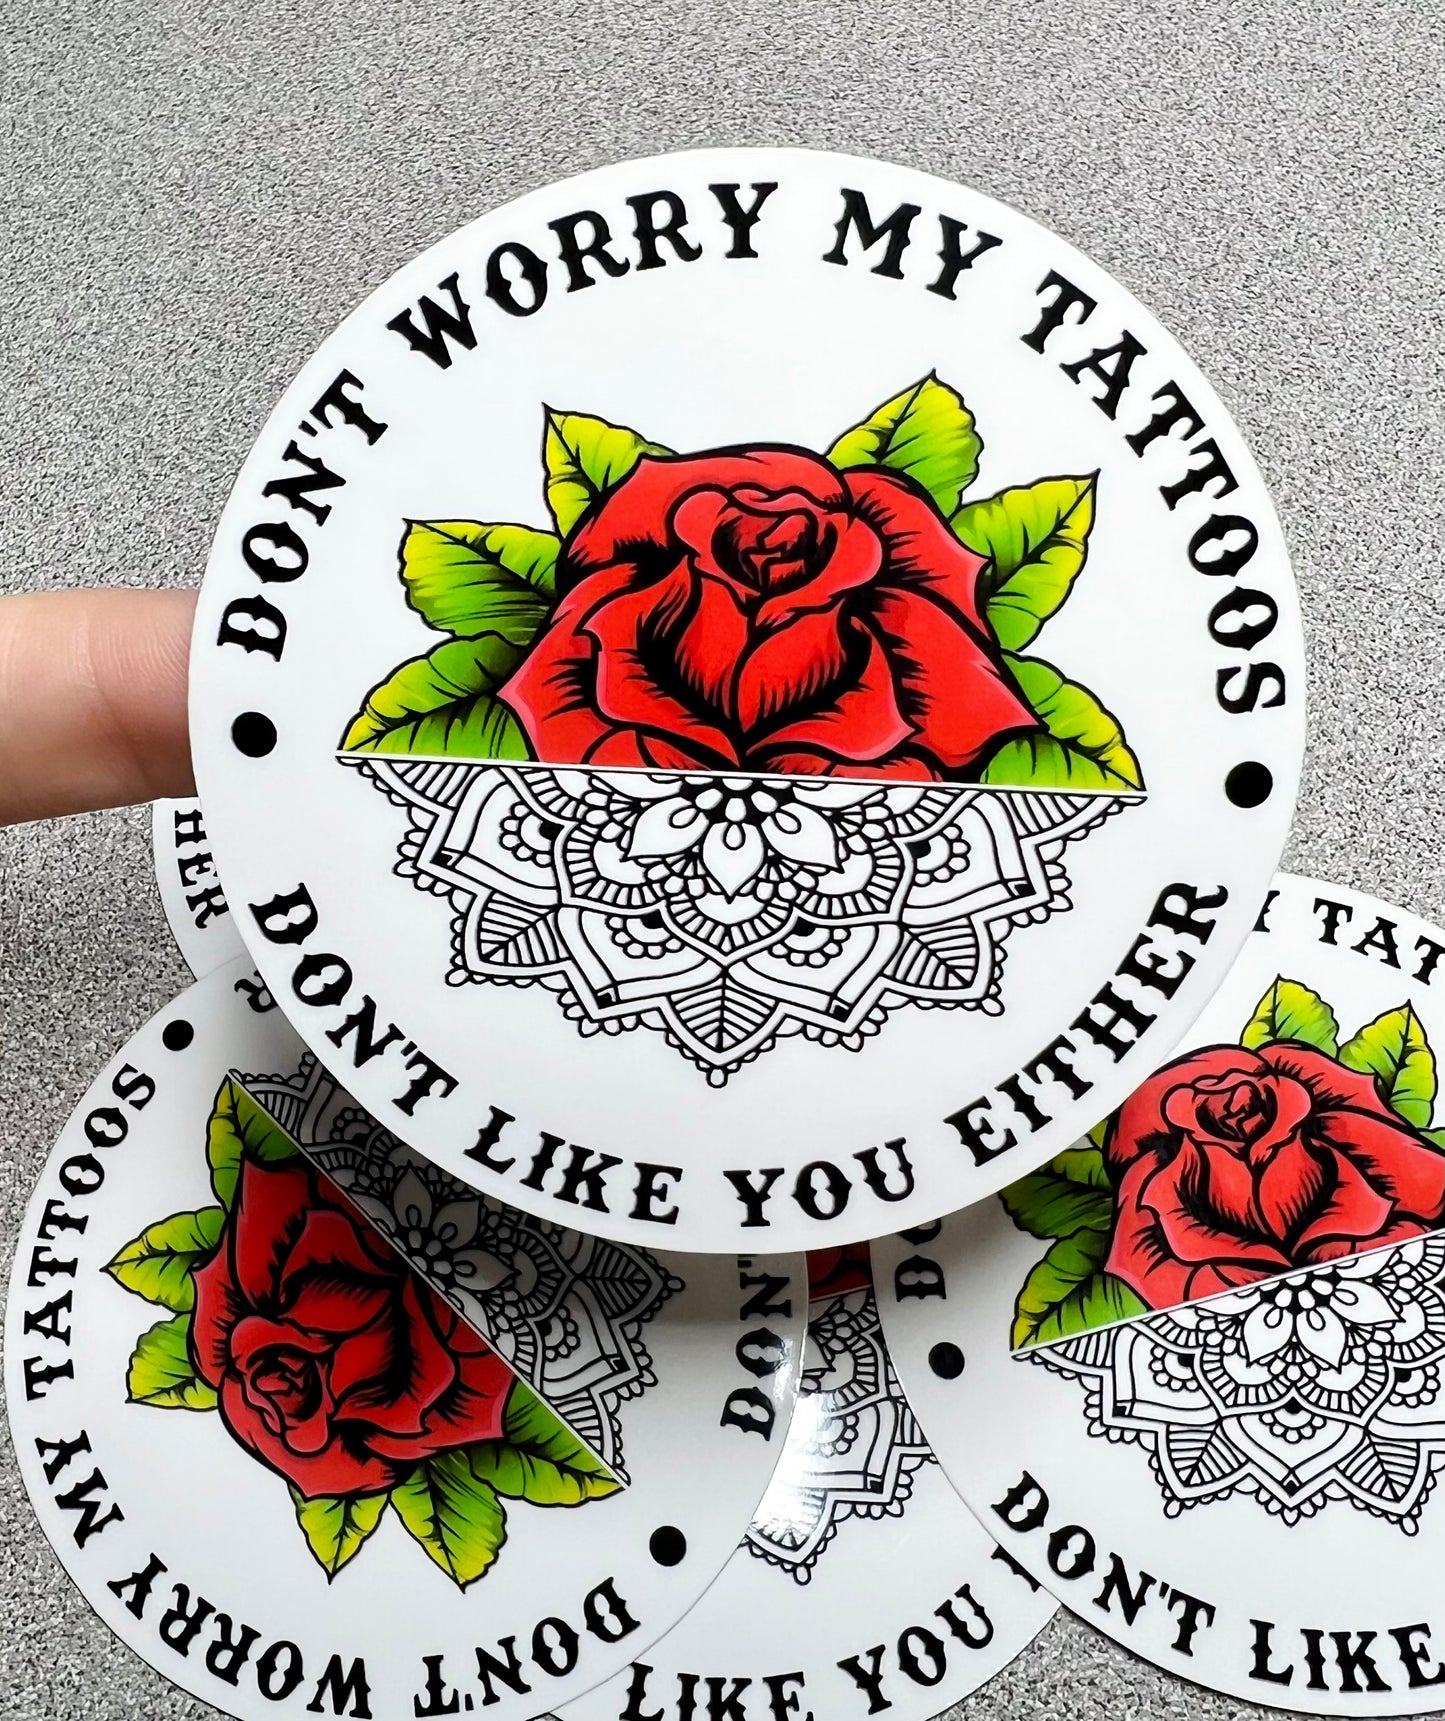 My Tattoos Don't Like You Vinyl Sticker Decal - Cherry Pit Designs